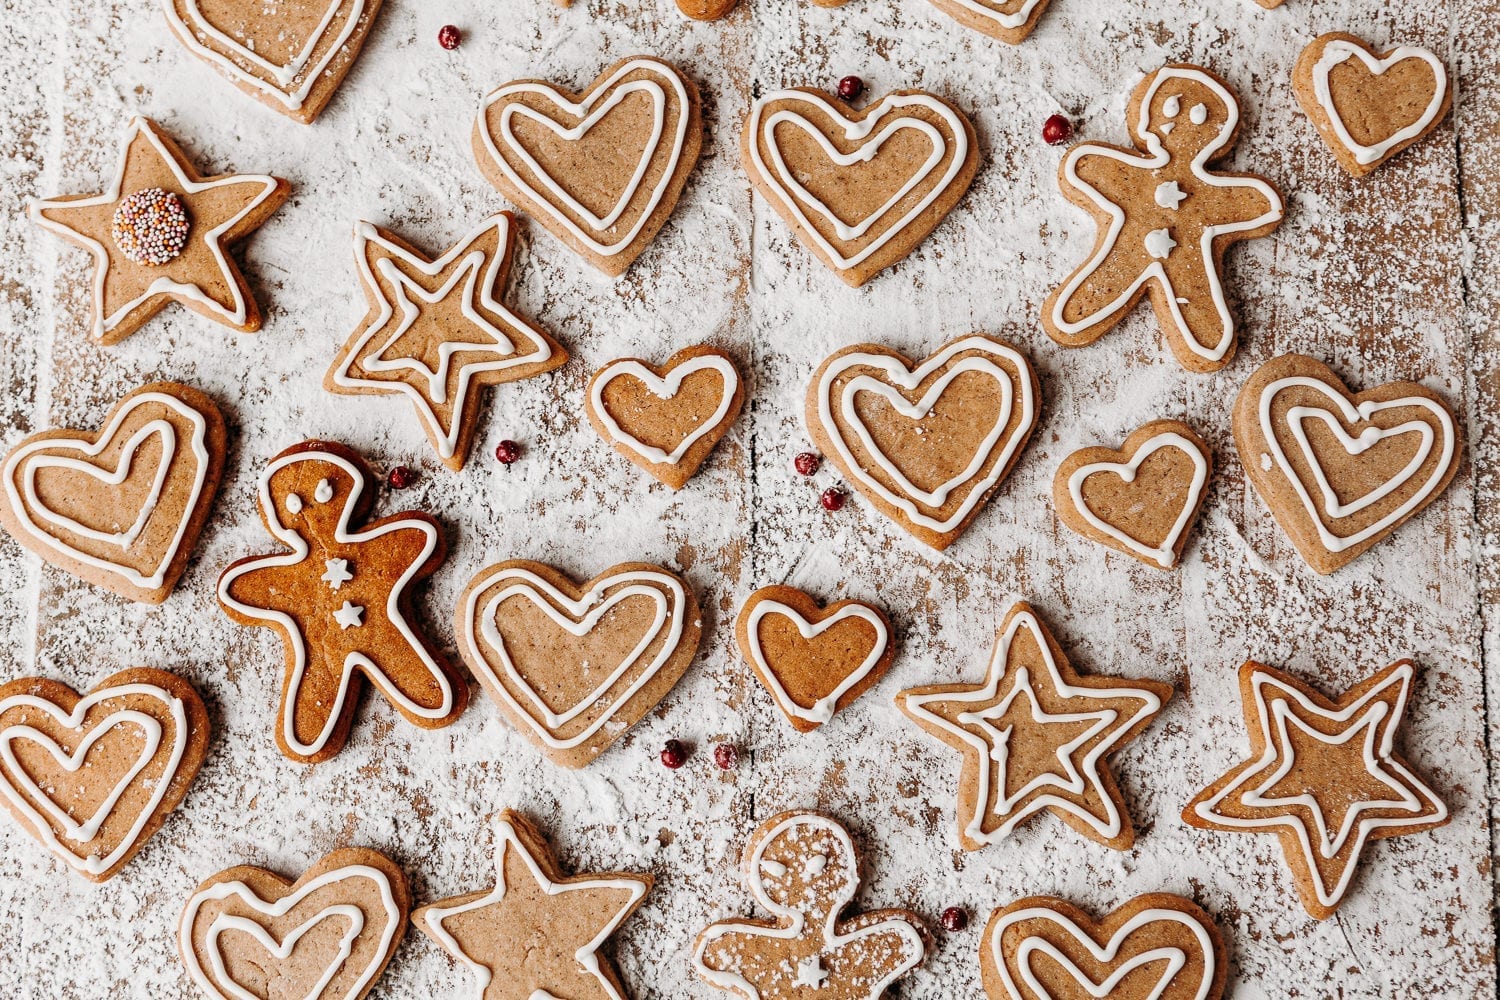 scandinavian homemade gingerbread cookies on a white background, hearts, stars